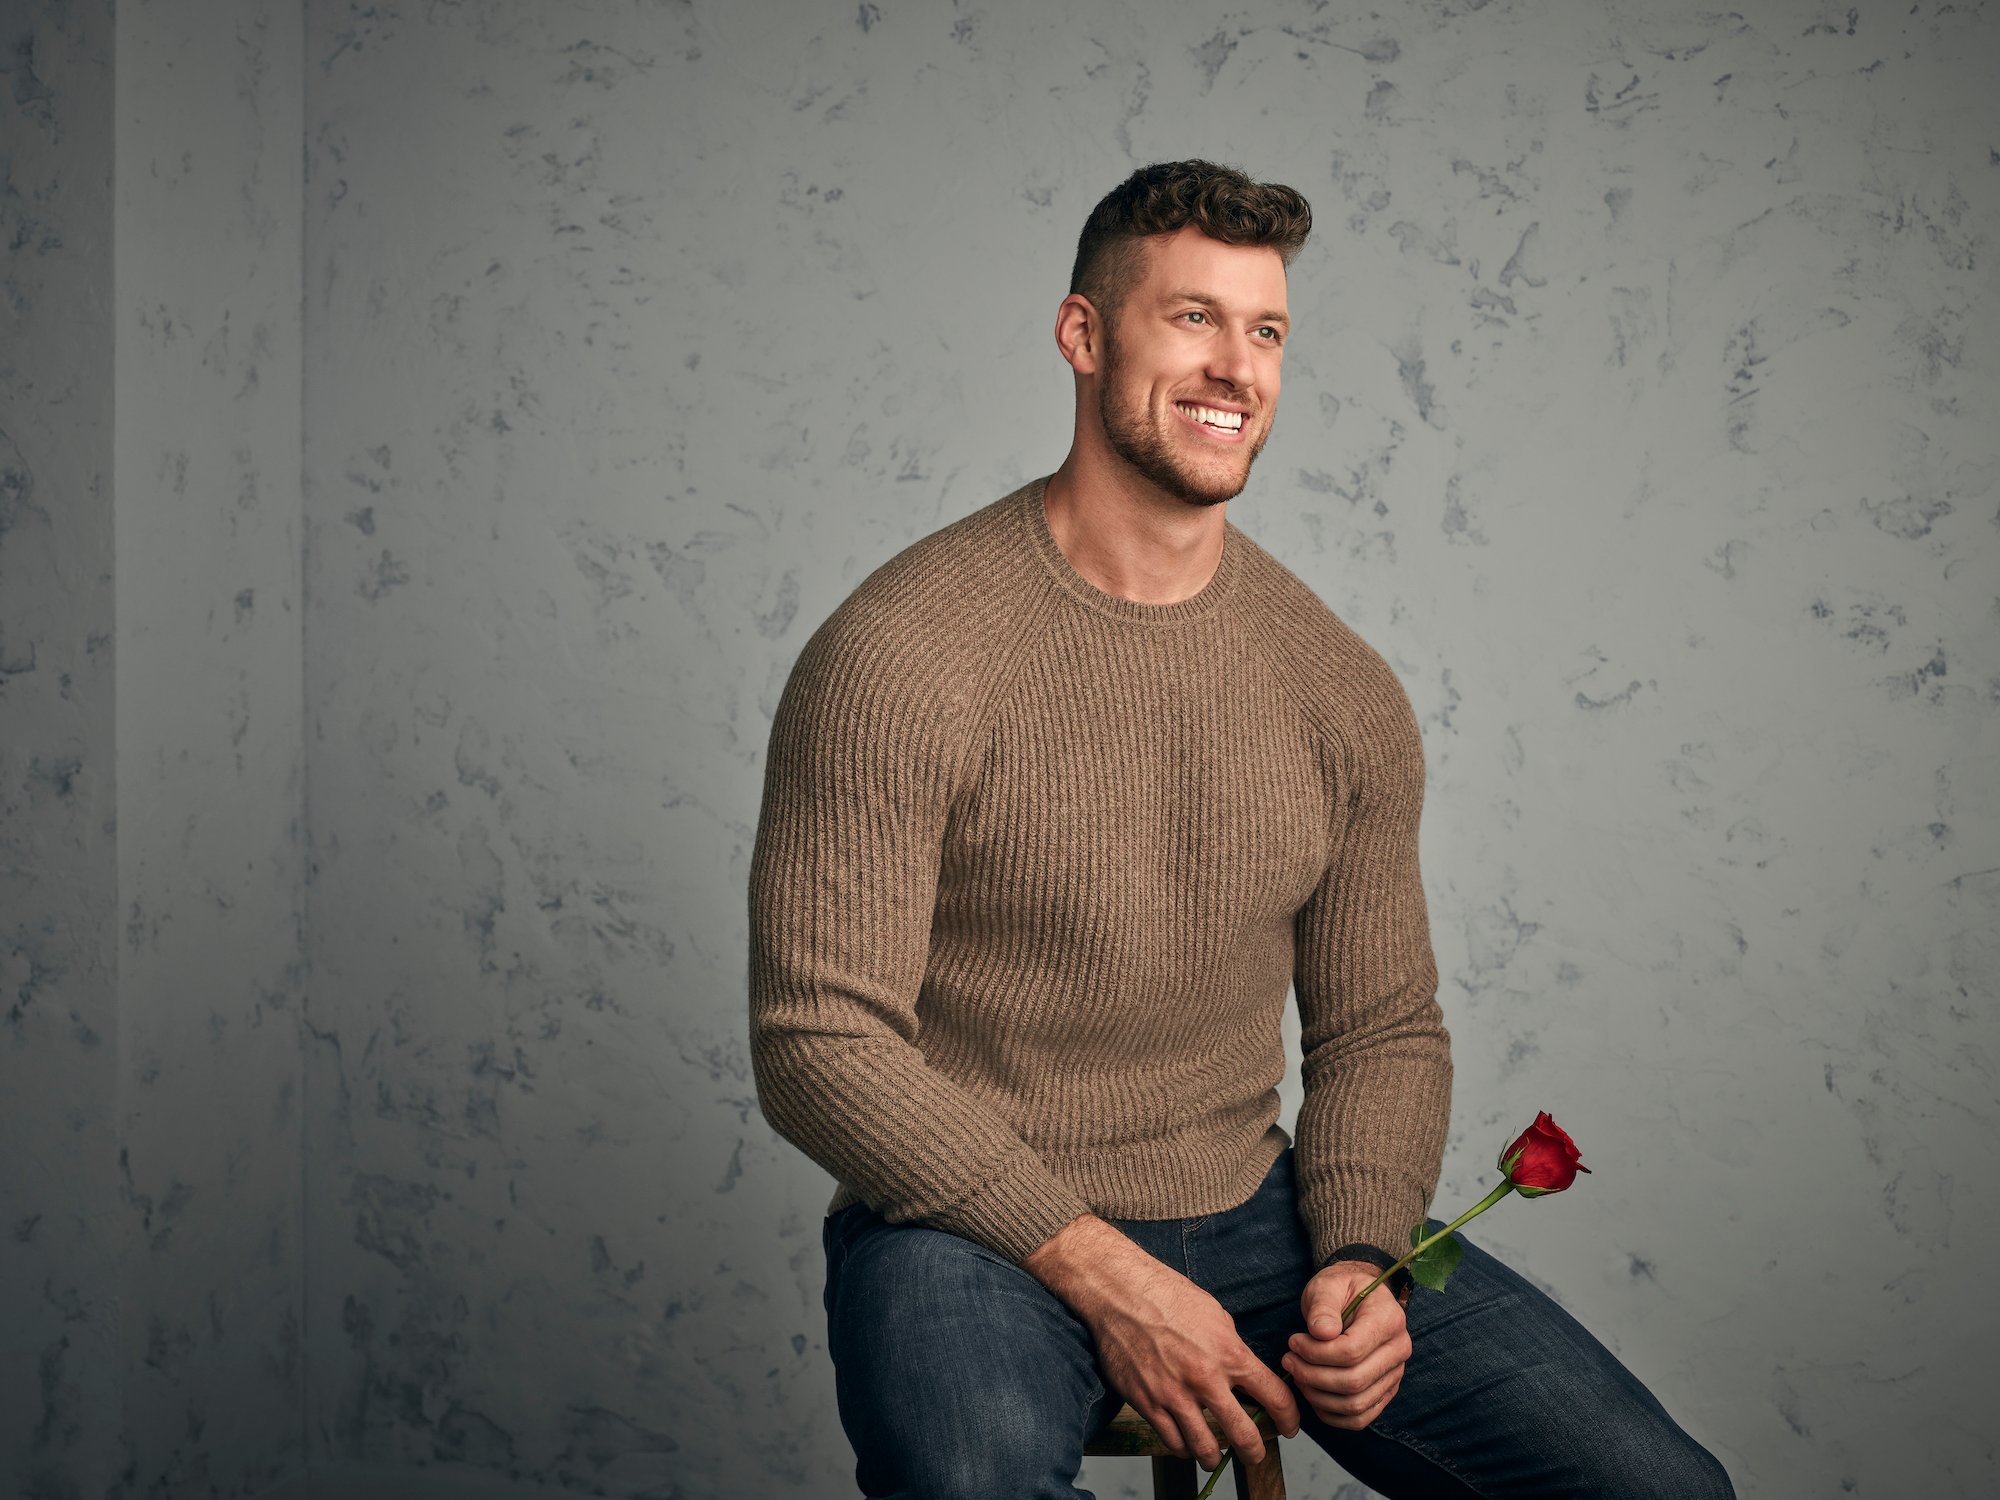 'The Bachelor' star Clayton Echard in a promo image wearing a tan, long-sleeved shirt